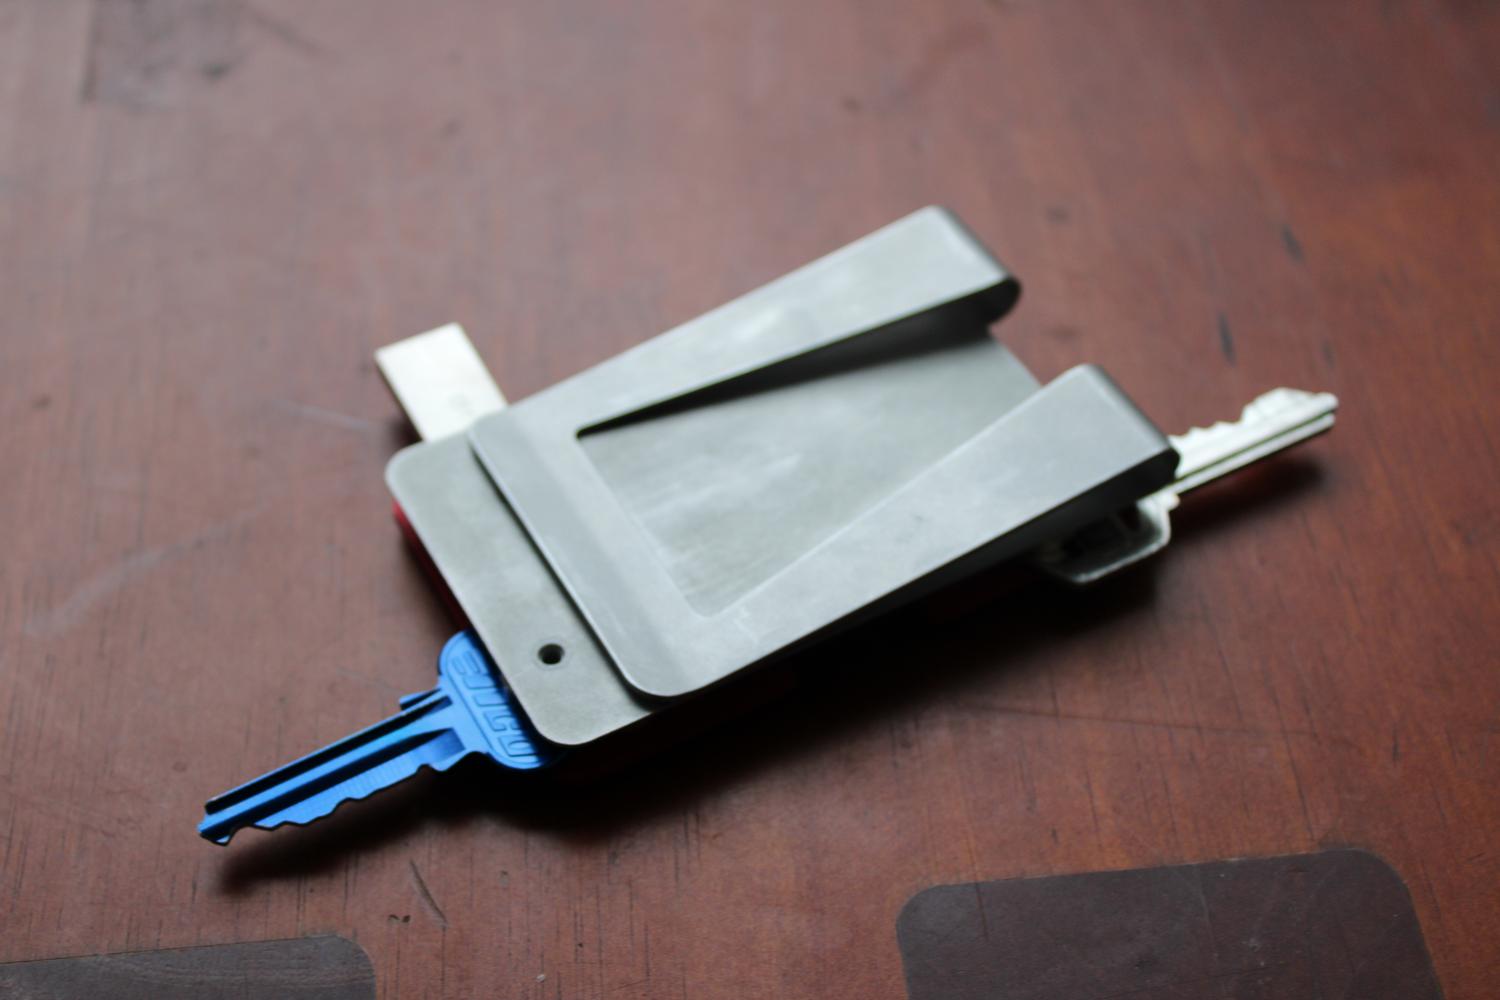 A close up photo of a table surface with the assembled metal wallet sitting on it. The wallet is upside down, with the keys and USB drive extended beyond the base plate. The bottom of the base plate is visible, as the wallet is upside down, and has a large clip at the bottom for slotting cards into.